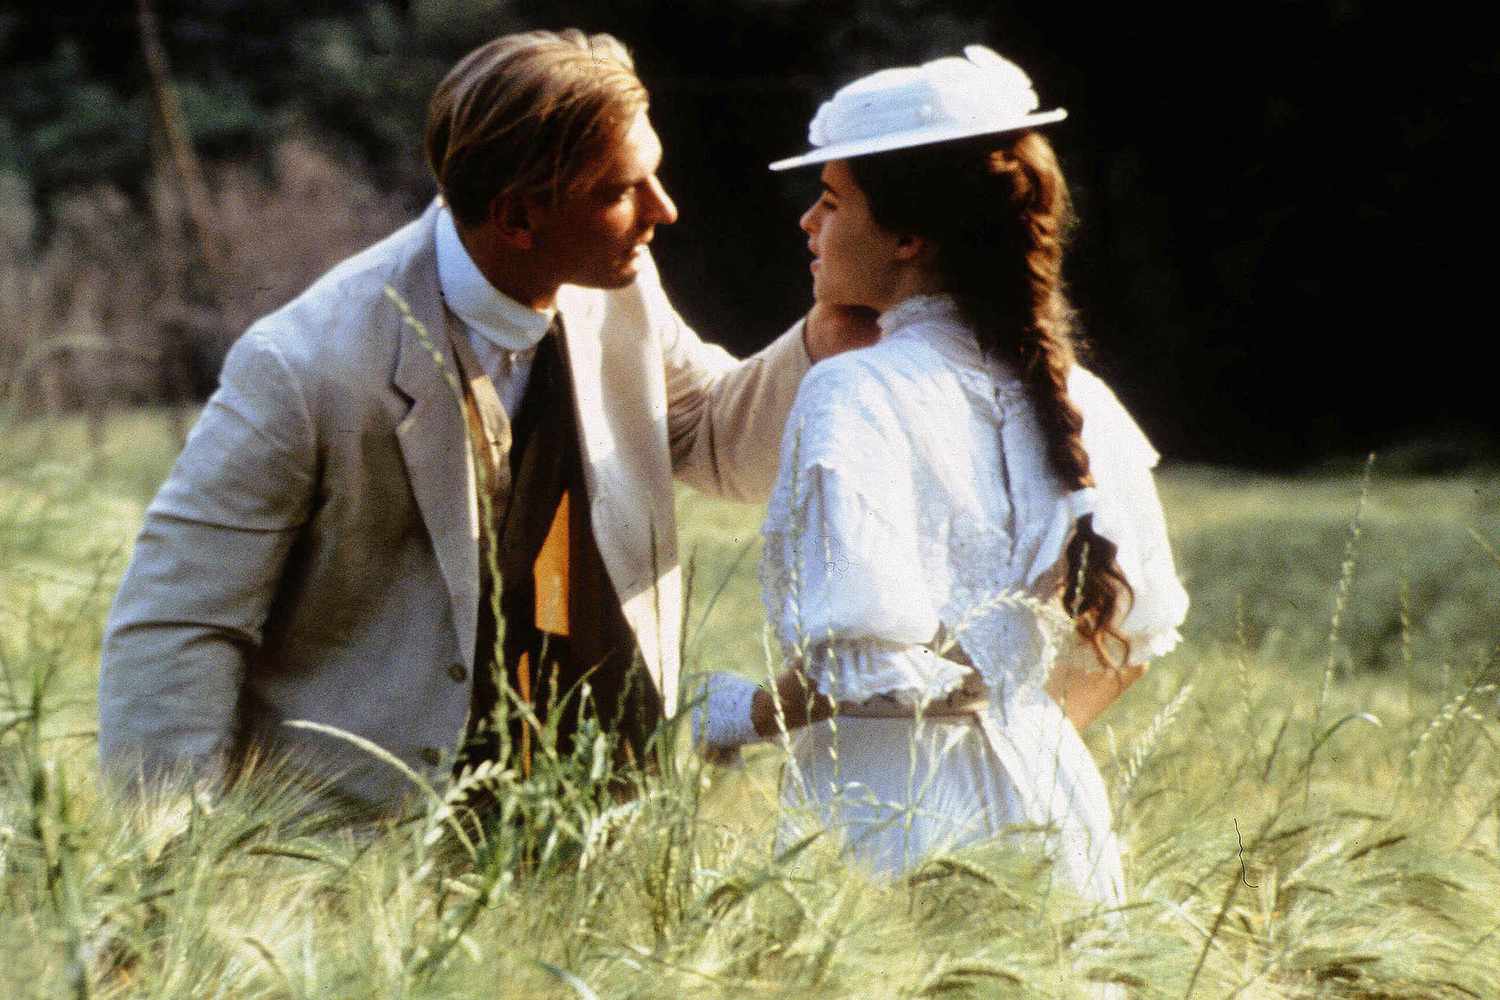 Editorial use only. No book cover usage. Mandatory Credit: Photo by Merchant Ivory/Goldcrest/Kobal/Shutterstock (5881076n) Helena Bonham Carter, Julian Sands A Room With A View - 1986 Director: James Ivory Merchant Ivory/Goldcrest BRITAIN Scene Still E.M.Forster Drama Chambre avec vue